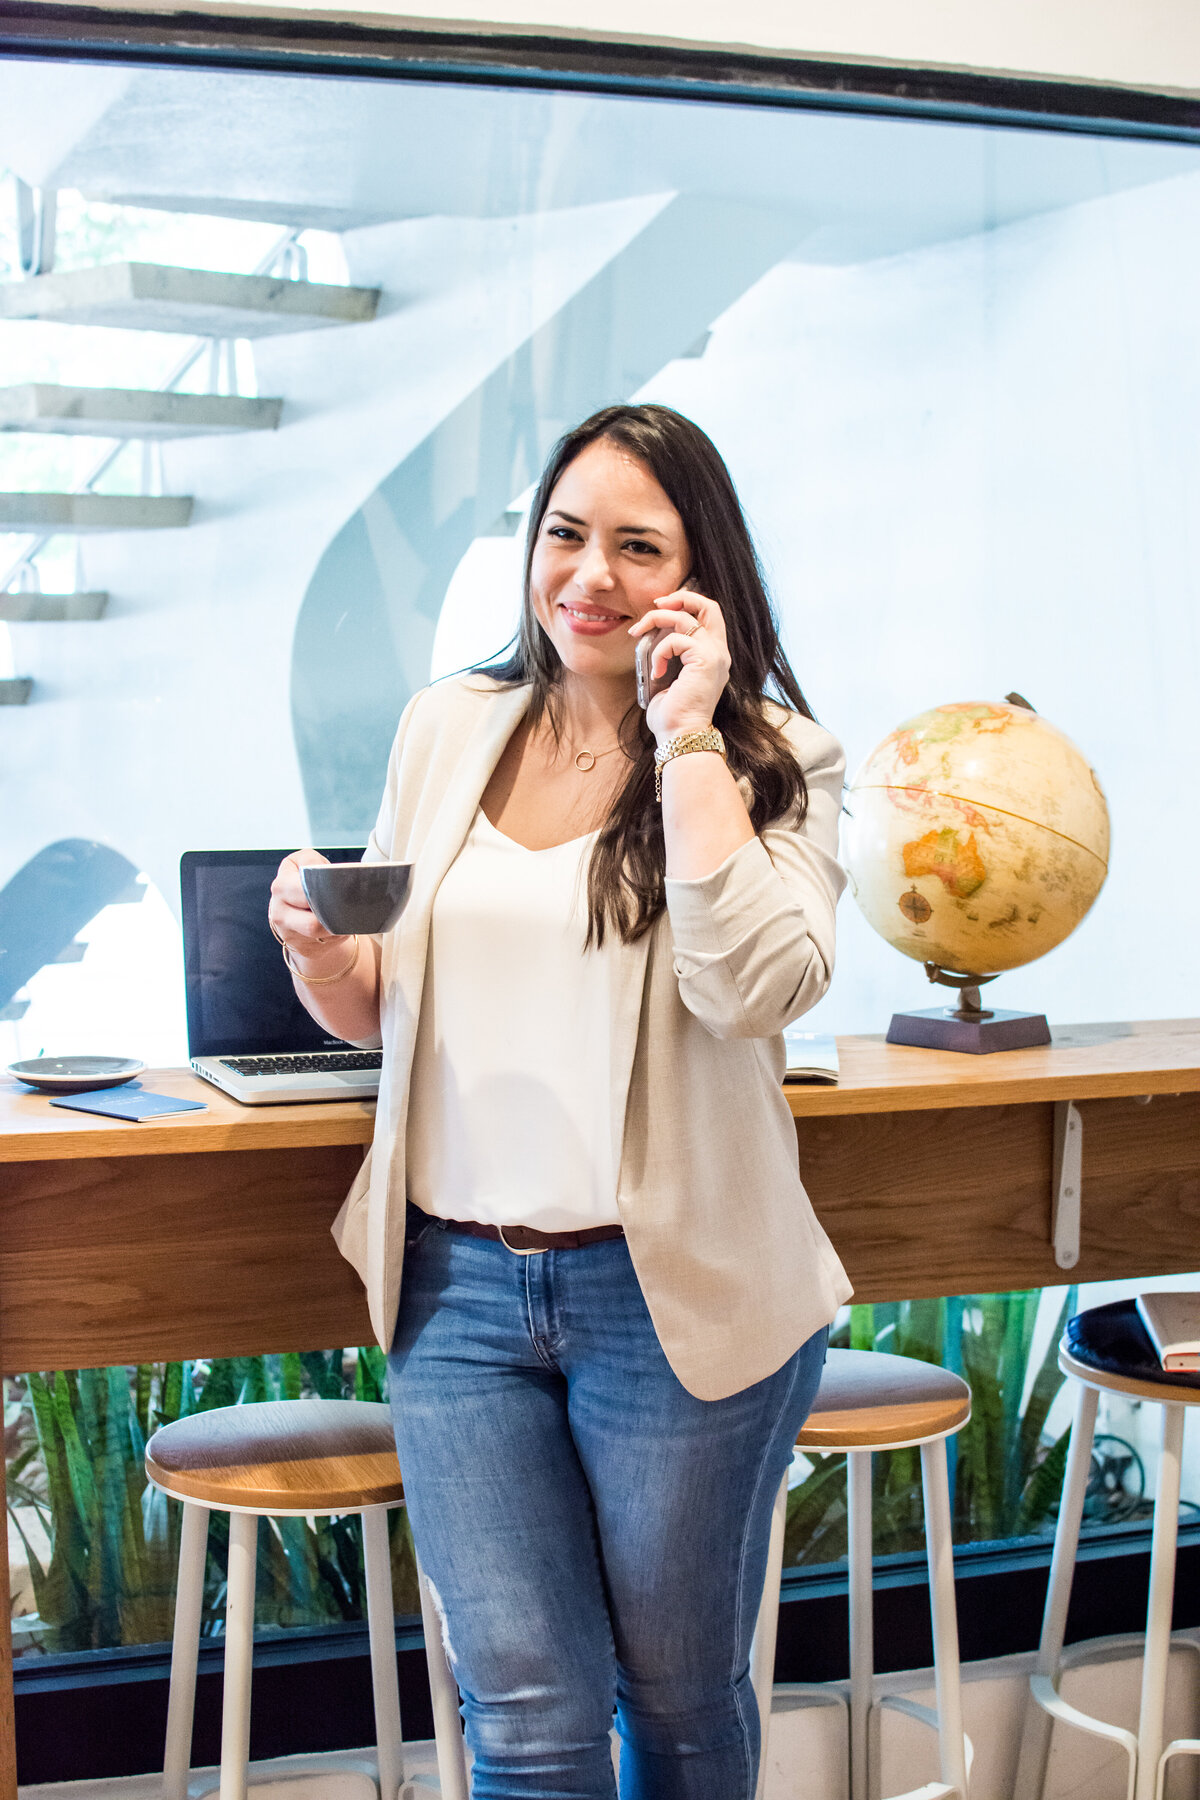 Smiling woman talking on cell phone holds a cup of coffee